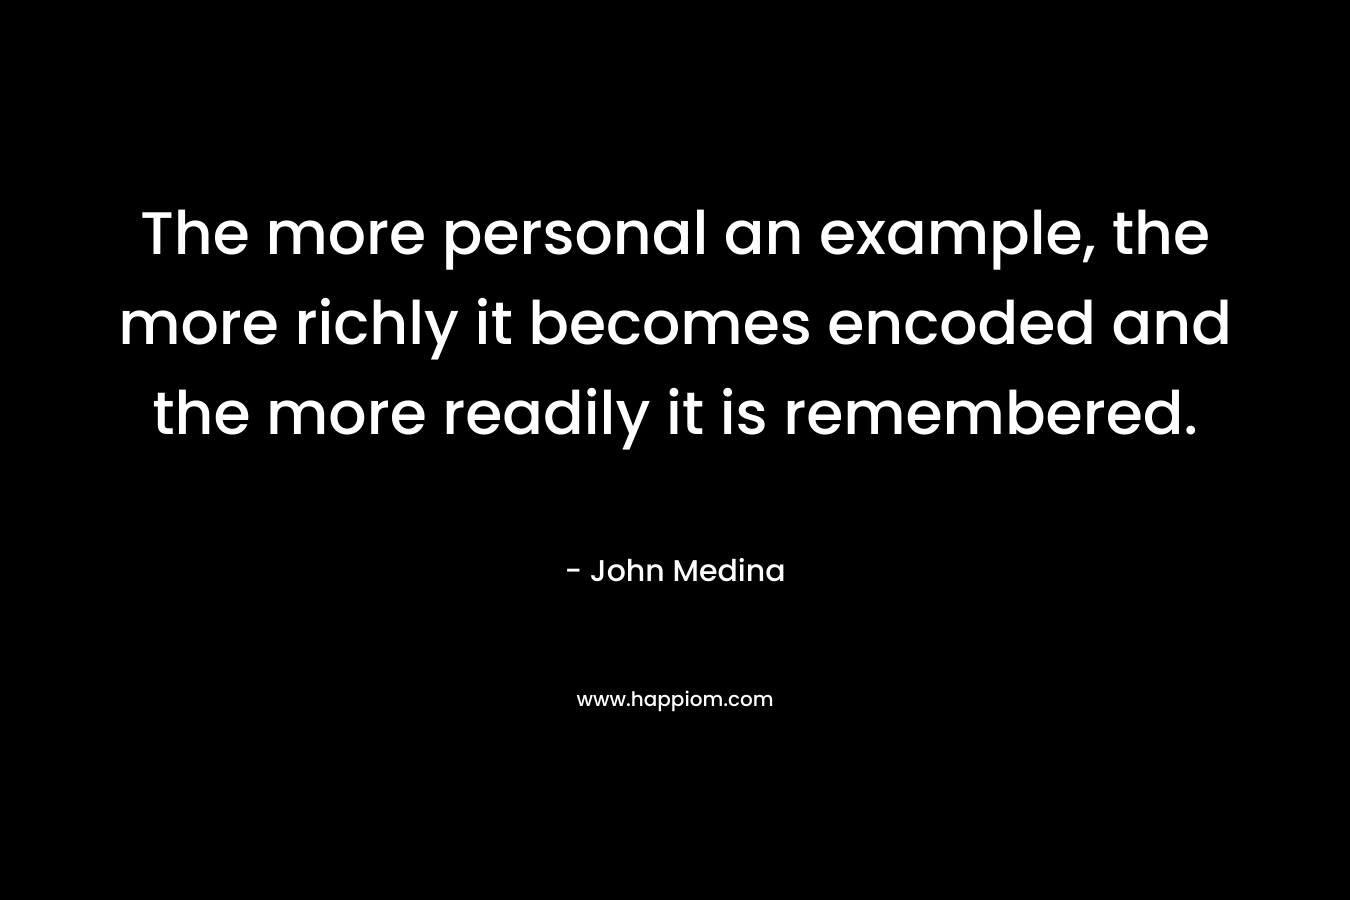 The more personal an example, the more richly it becomes encoded and the more readily it is remembered. – John Medina